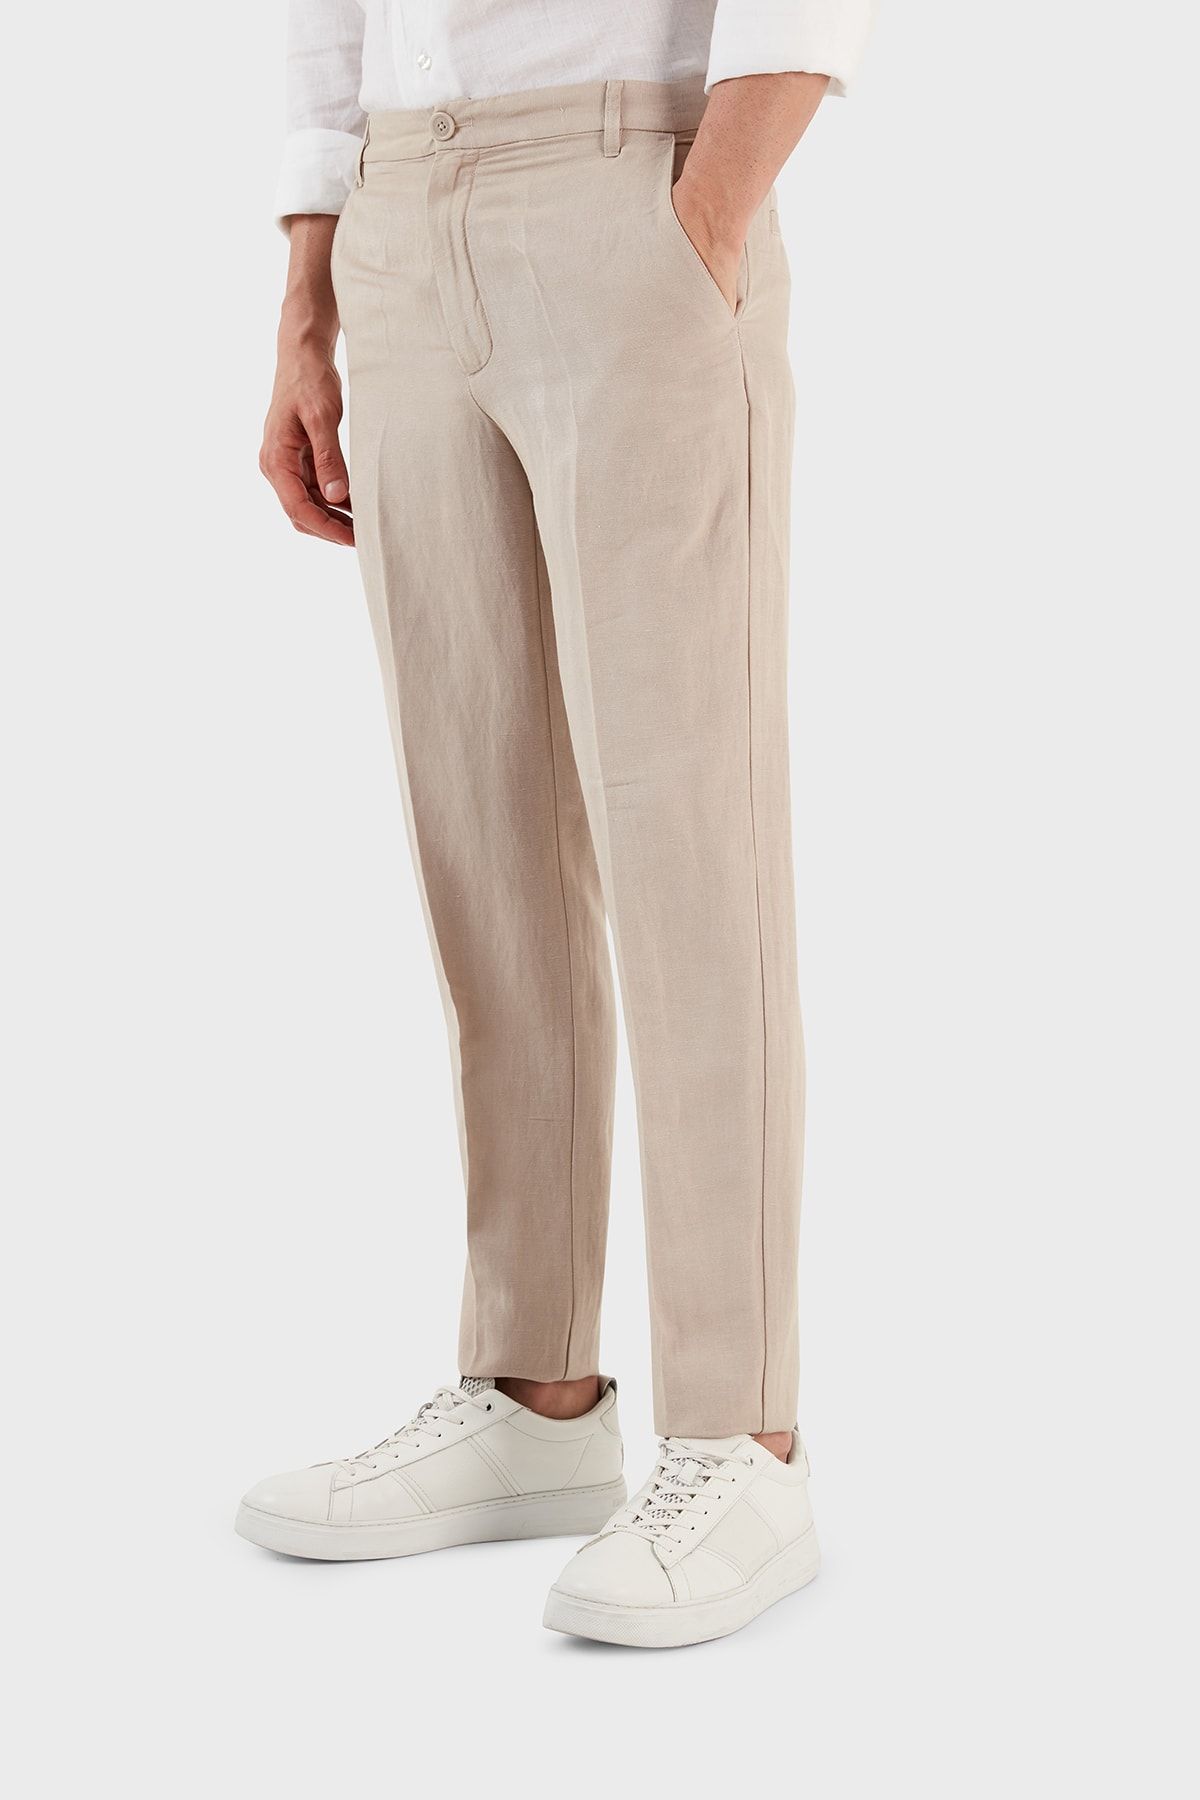 Armani Exchange slim fit trousers in ultra stretch twill - ARMANI EXCHANGE  - Pellecchia Store